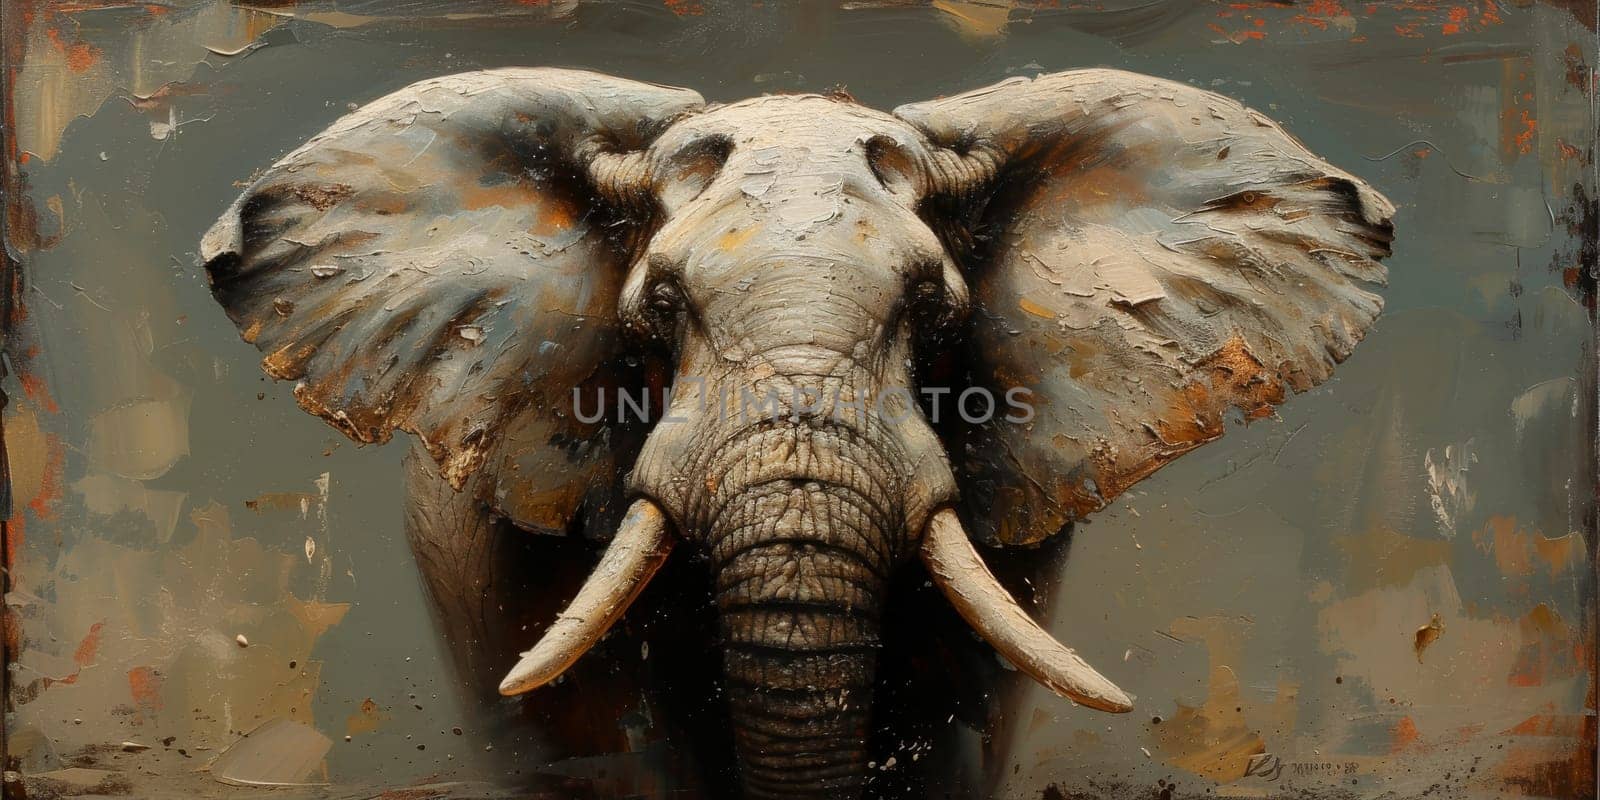 Oil painting of elephant, artist collection of animal painting for decoration and interior